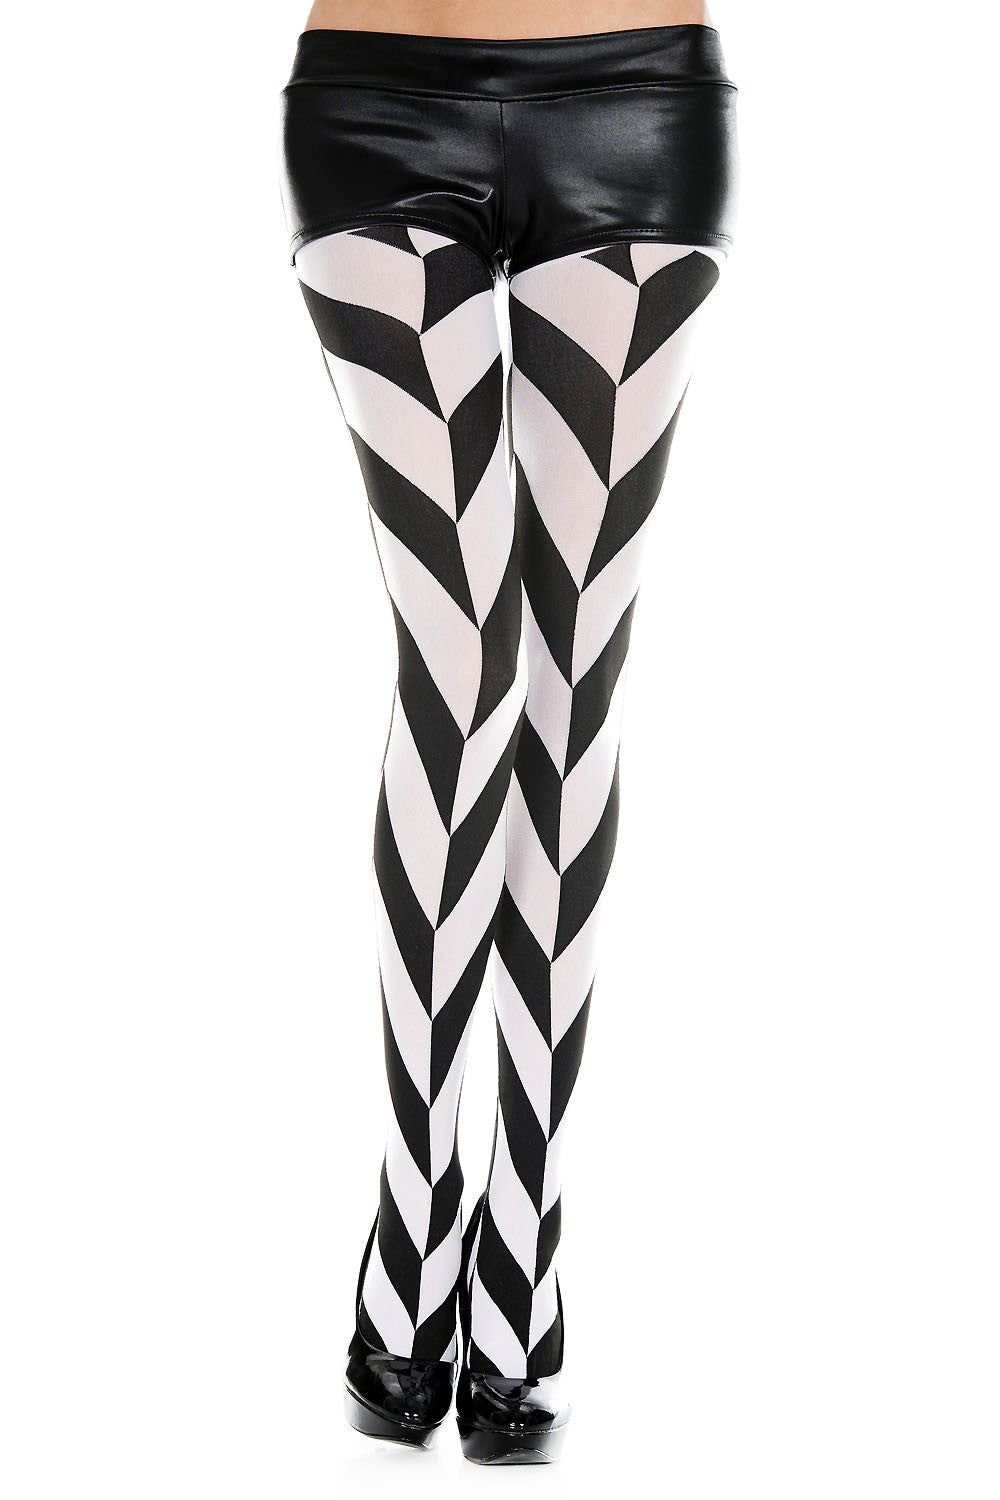 Black and white diagonal Tights - Lust Charm 